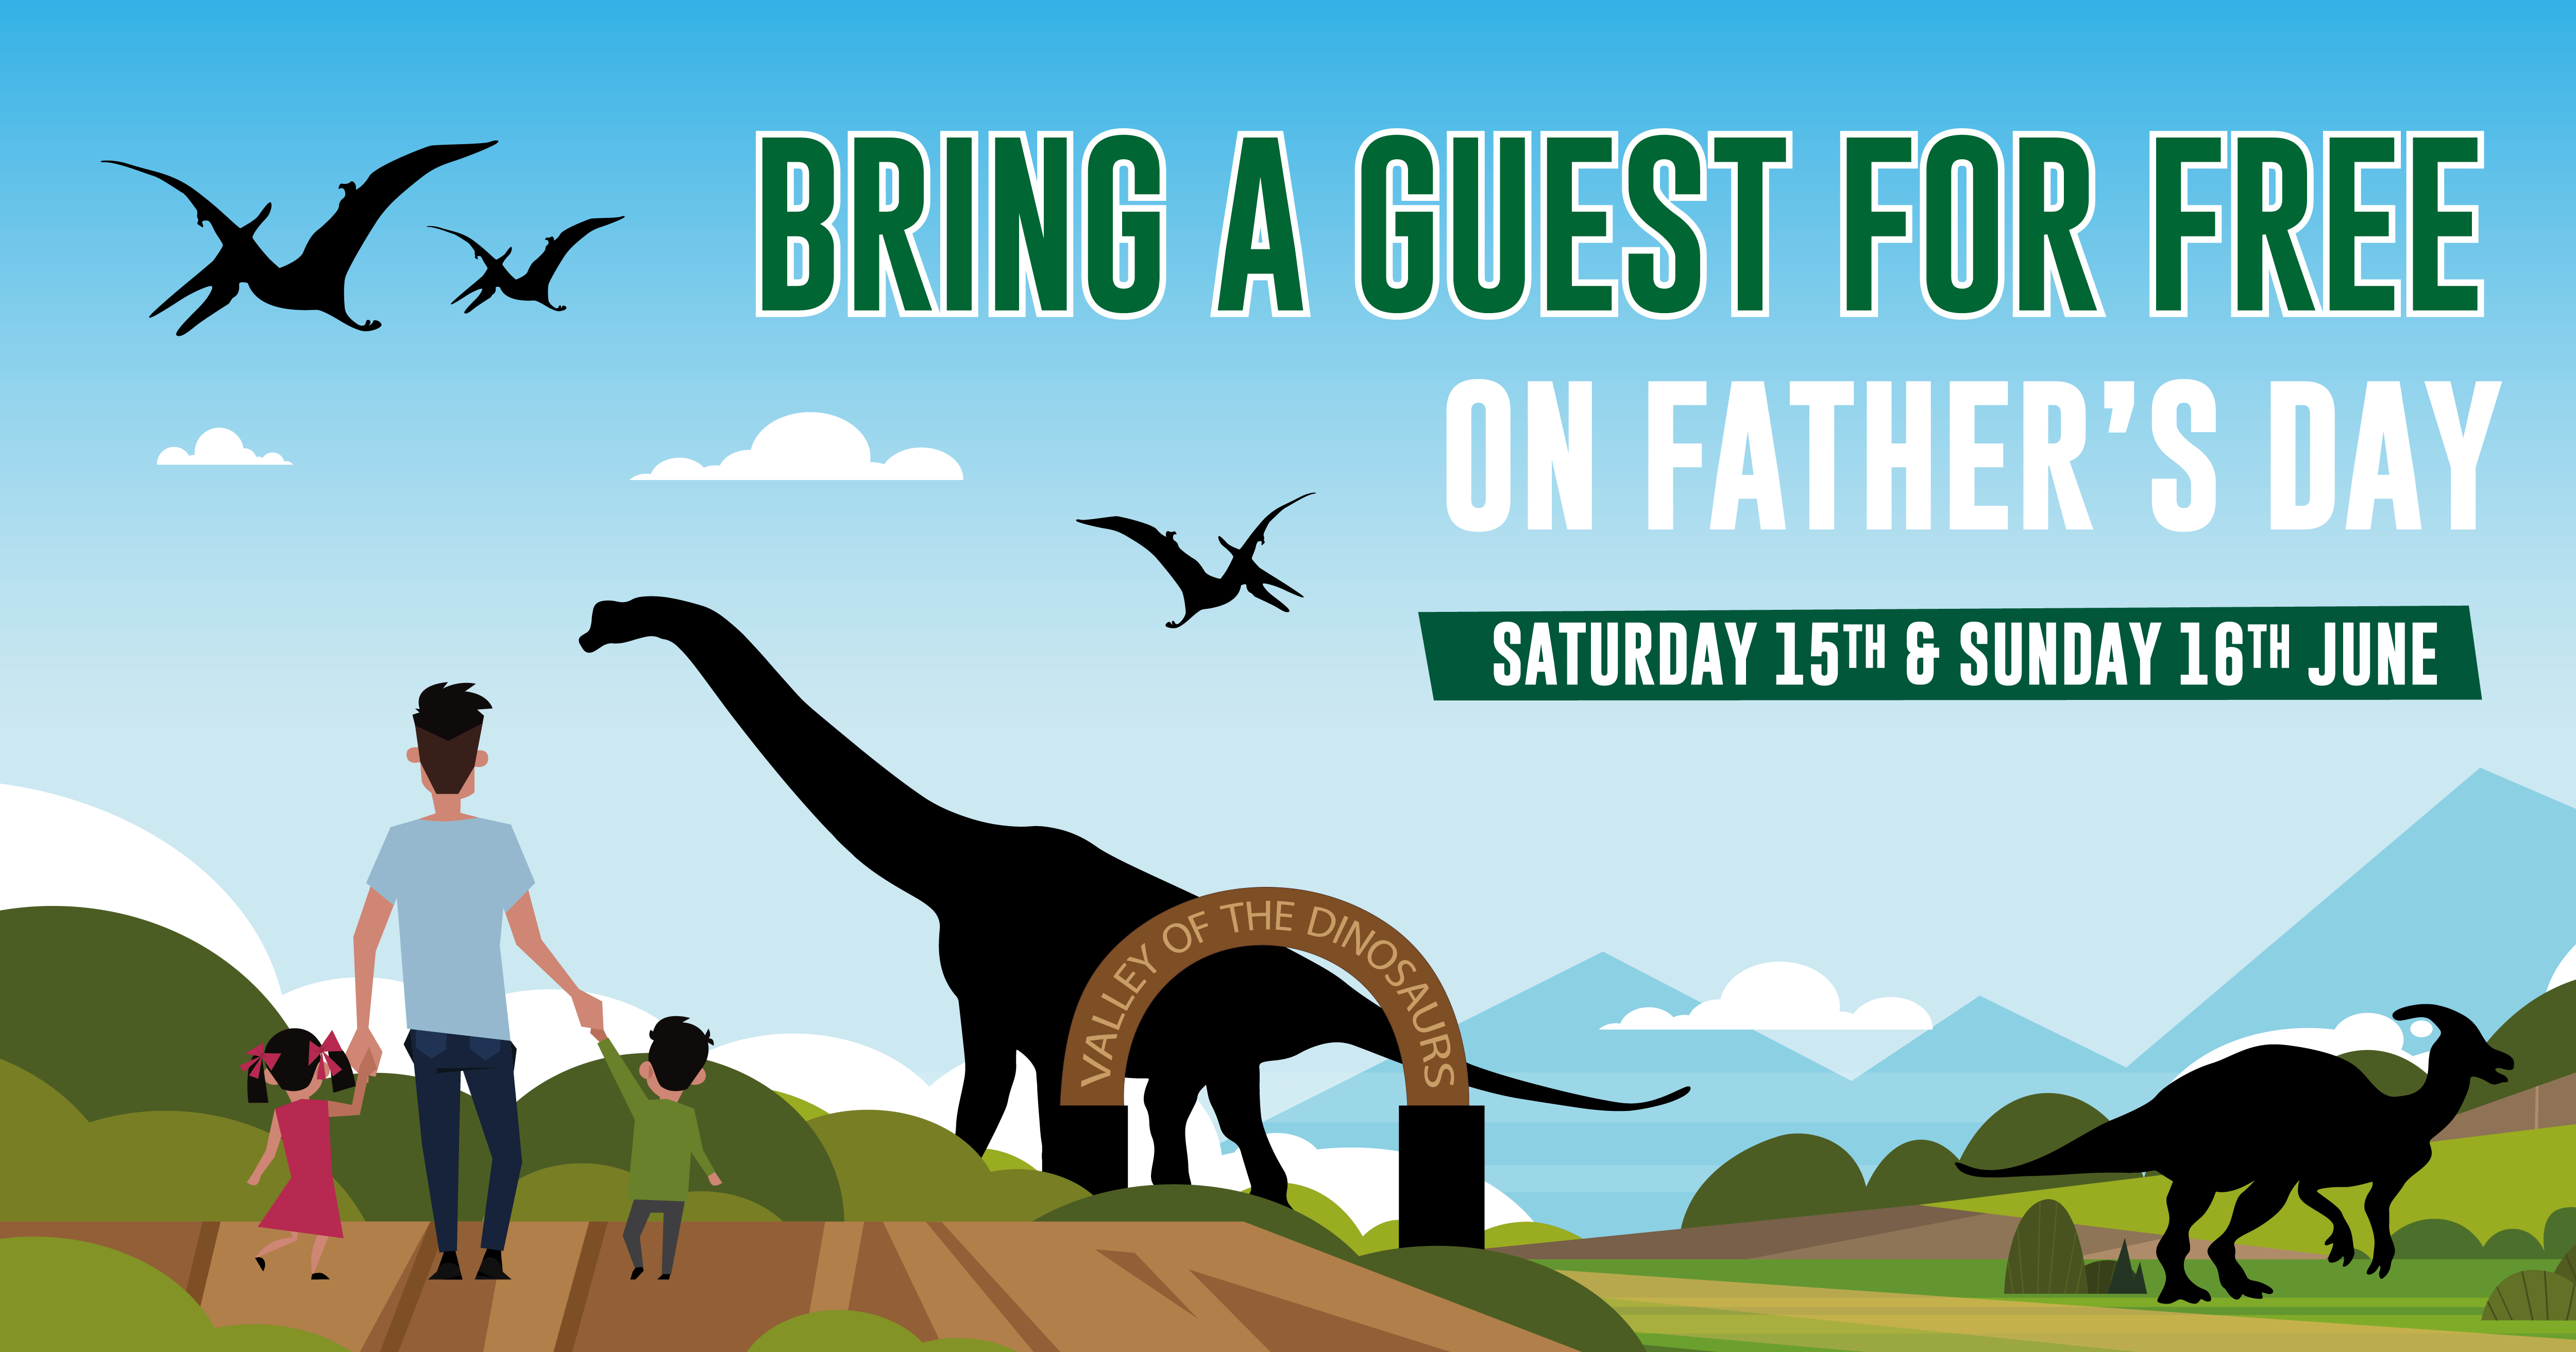 Bring a Guest for FREE this Father's Day Weekend